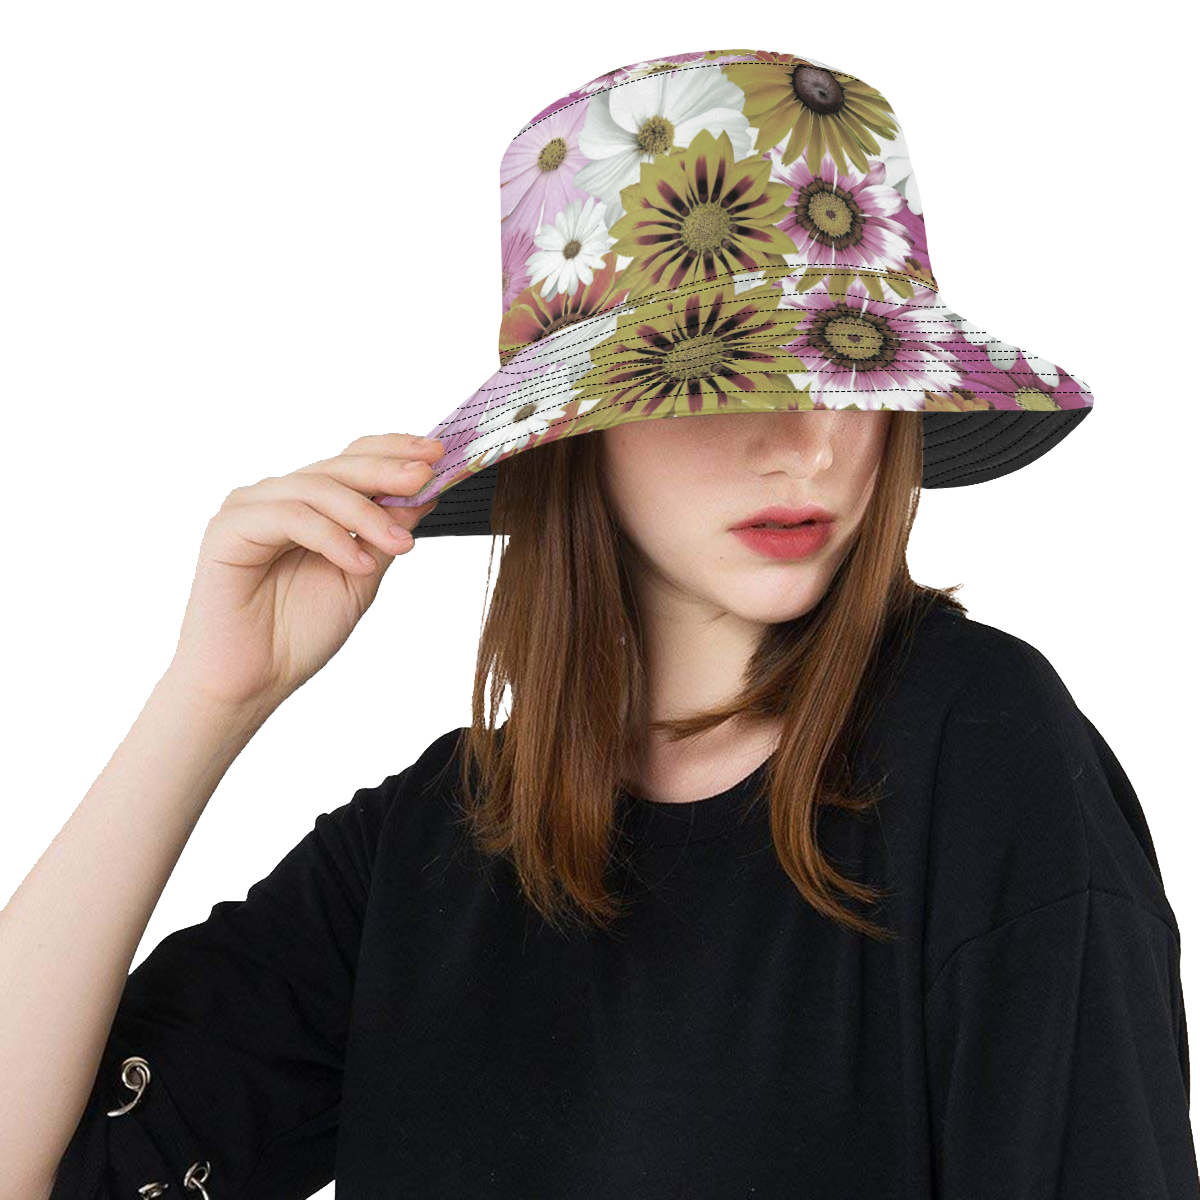 Spring Time Flowers 4 All Over Print Bucket Hat